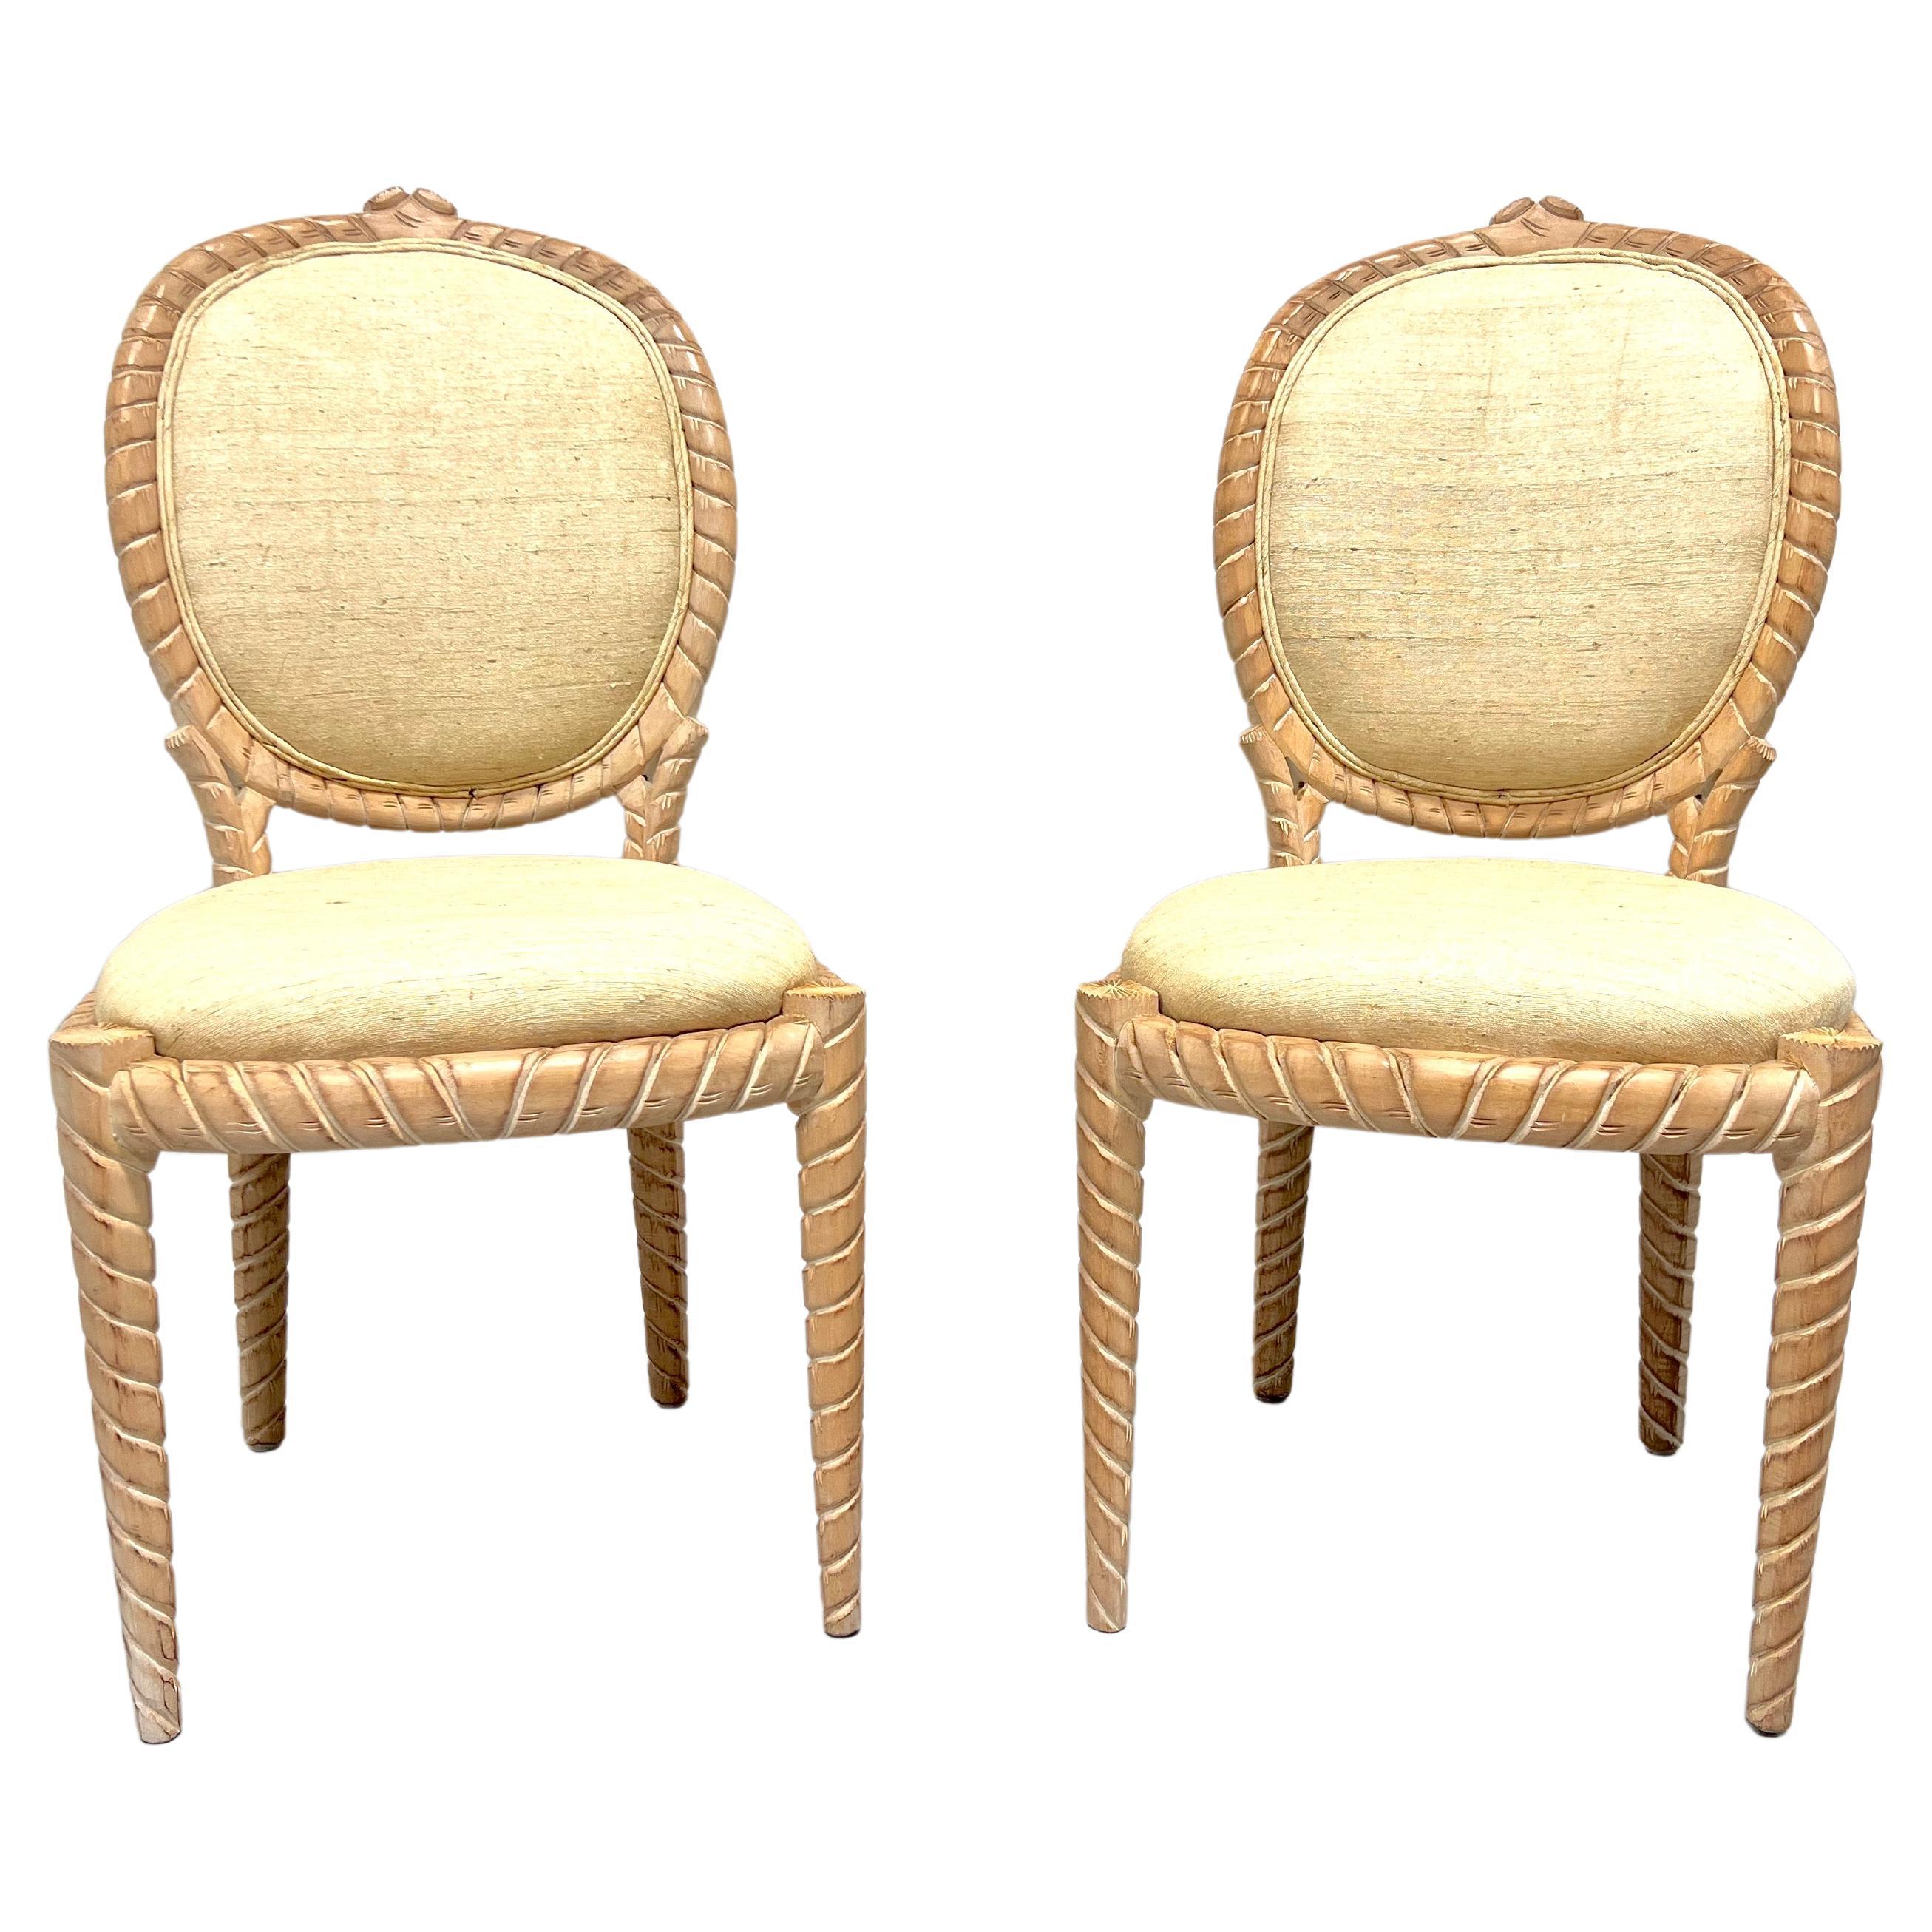 1980's Carved Whitewashed Wood Boho Rope Twist Dining Side Chairs - Pair B For Sale